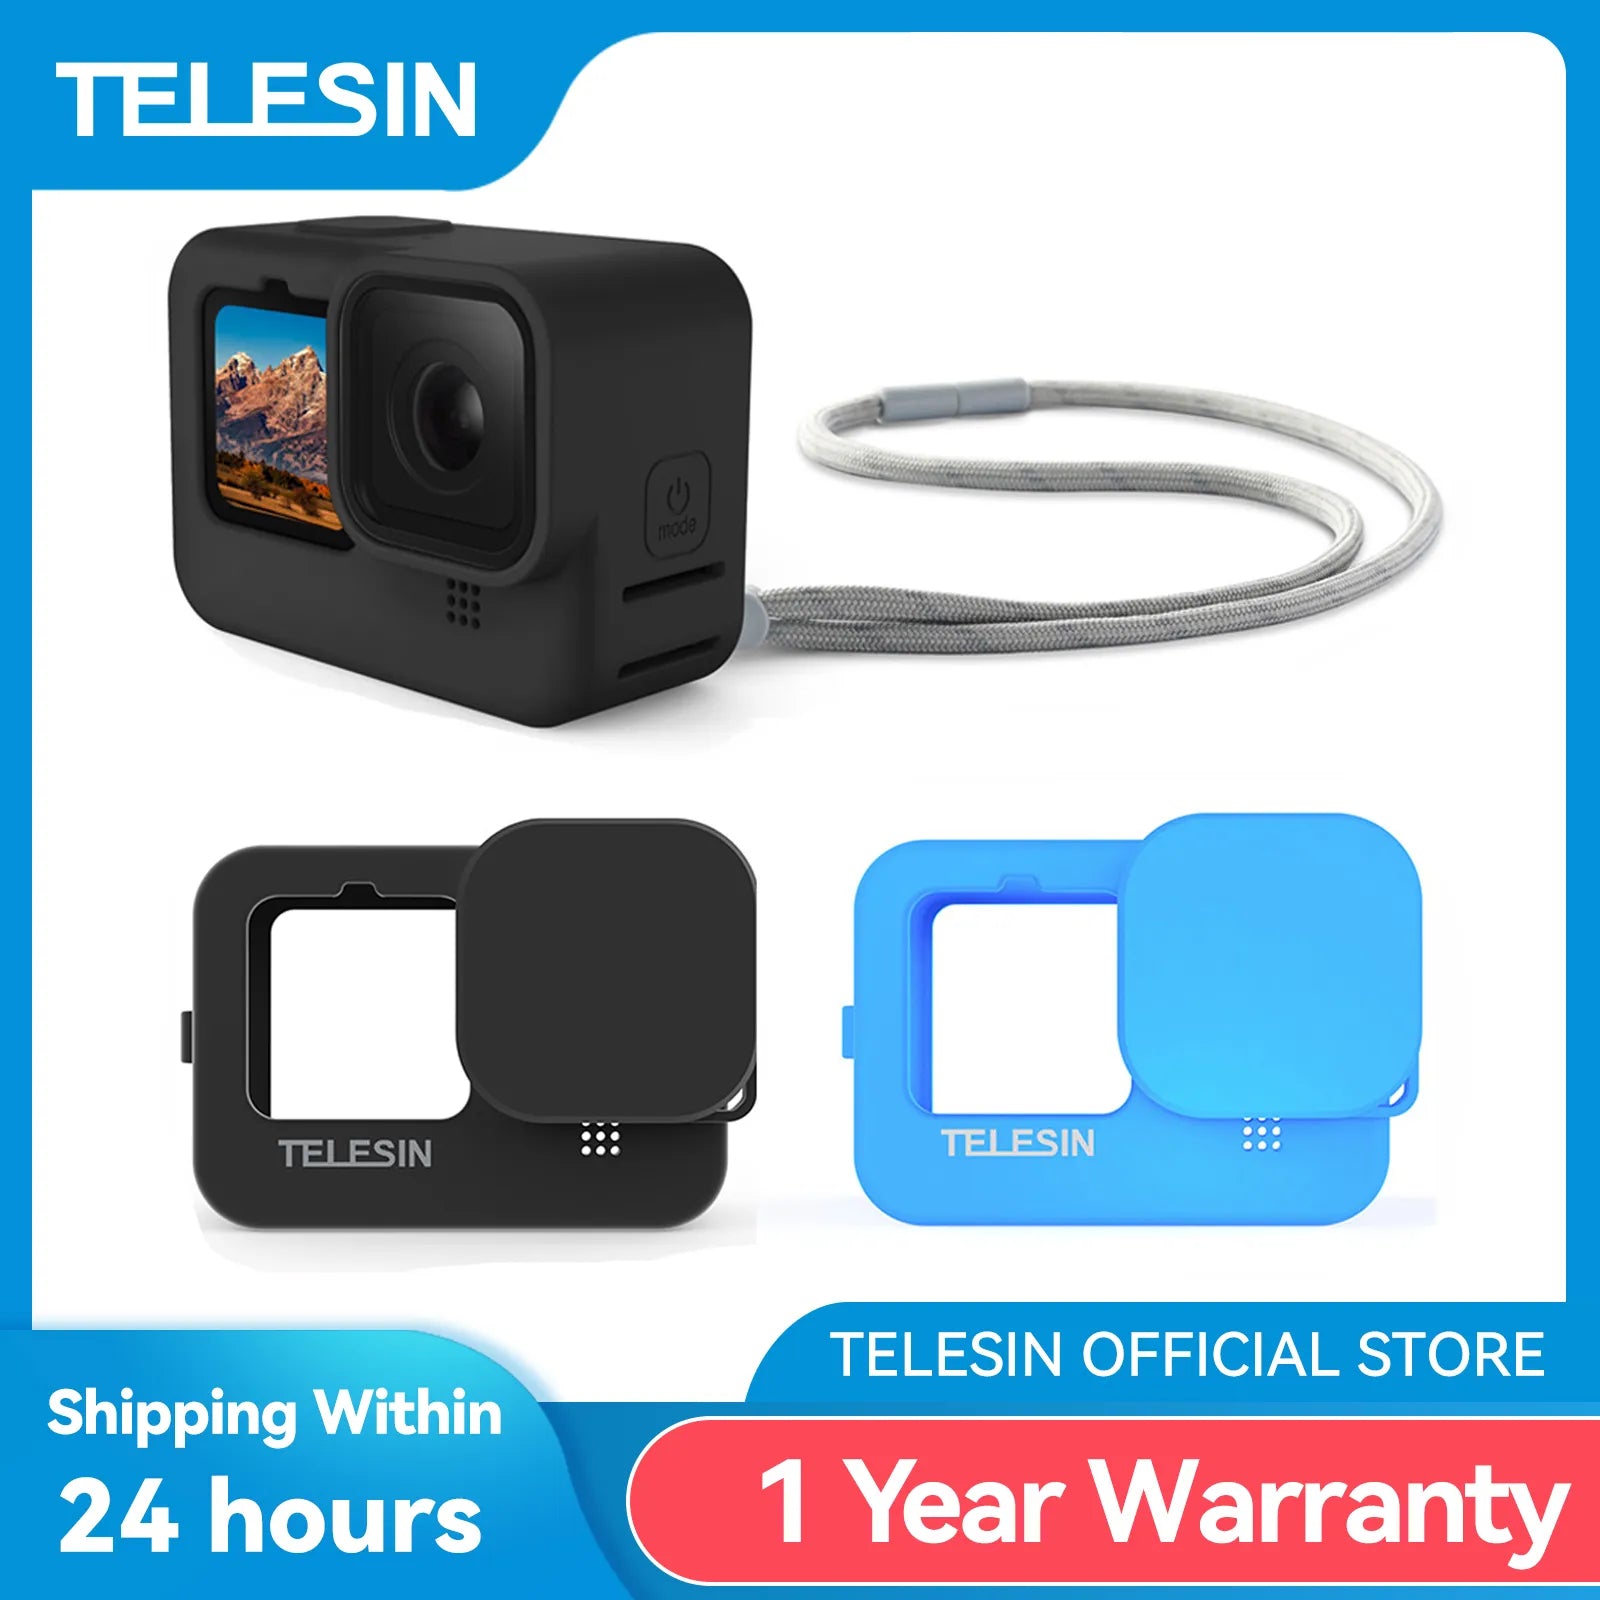 Telesin Soft Silicone Case For Gopro 9 10 11 Lens Cap Blue Black Adjustable Hand Wrist Strap For Gopro Hero Black Accessories